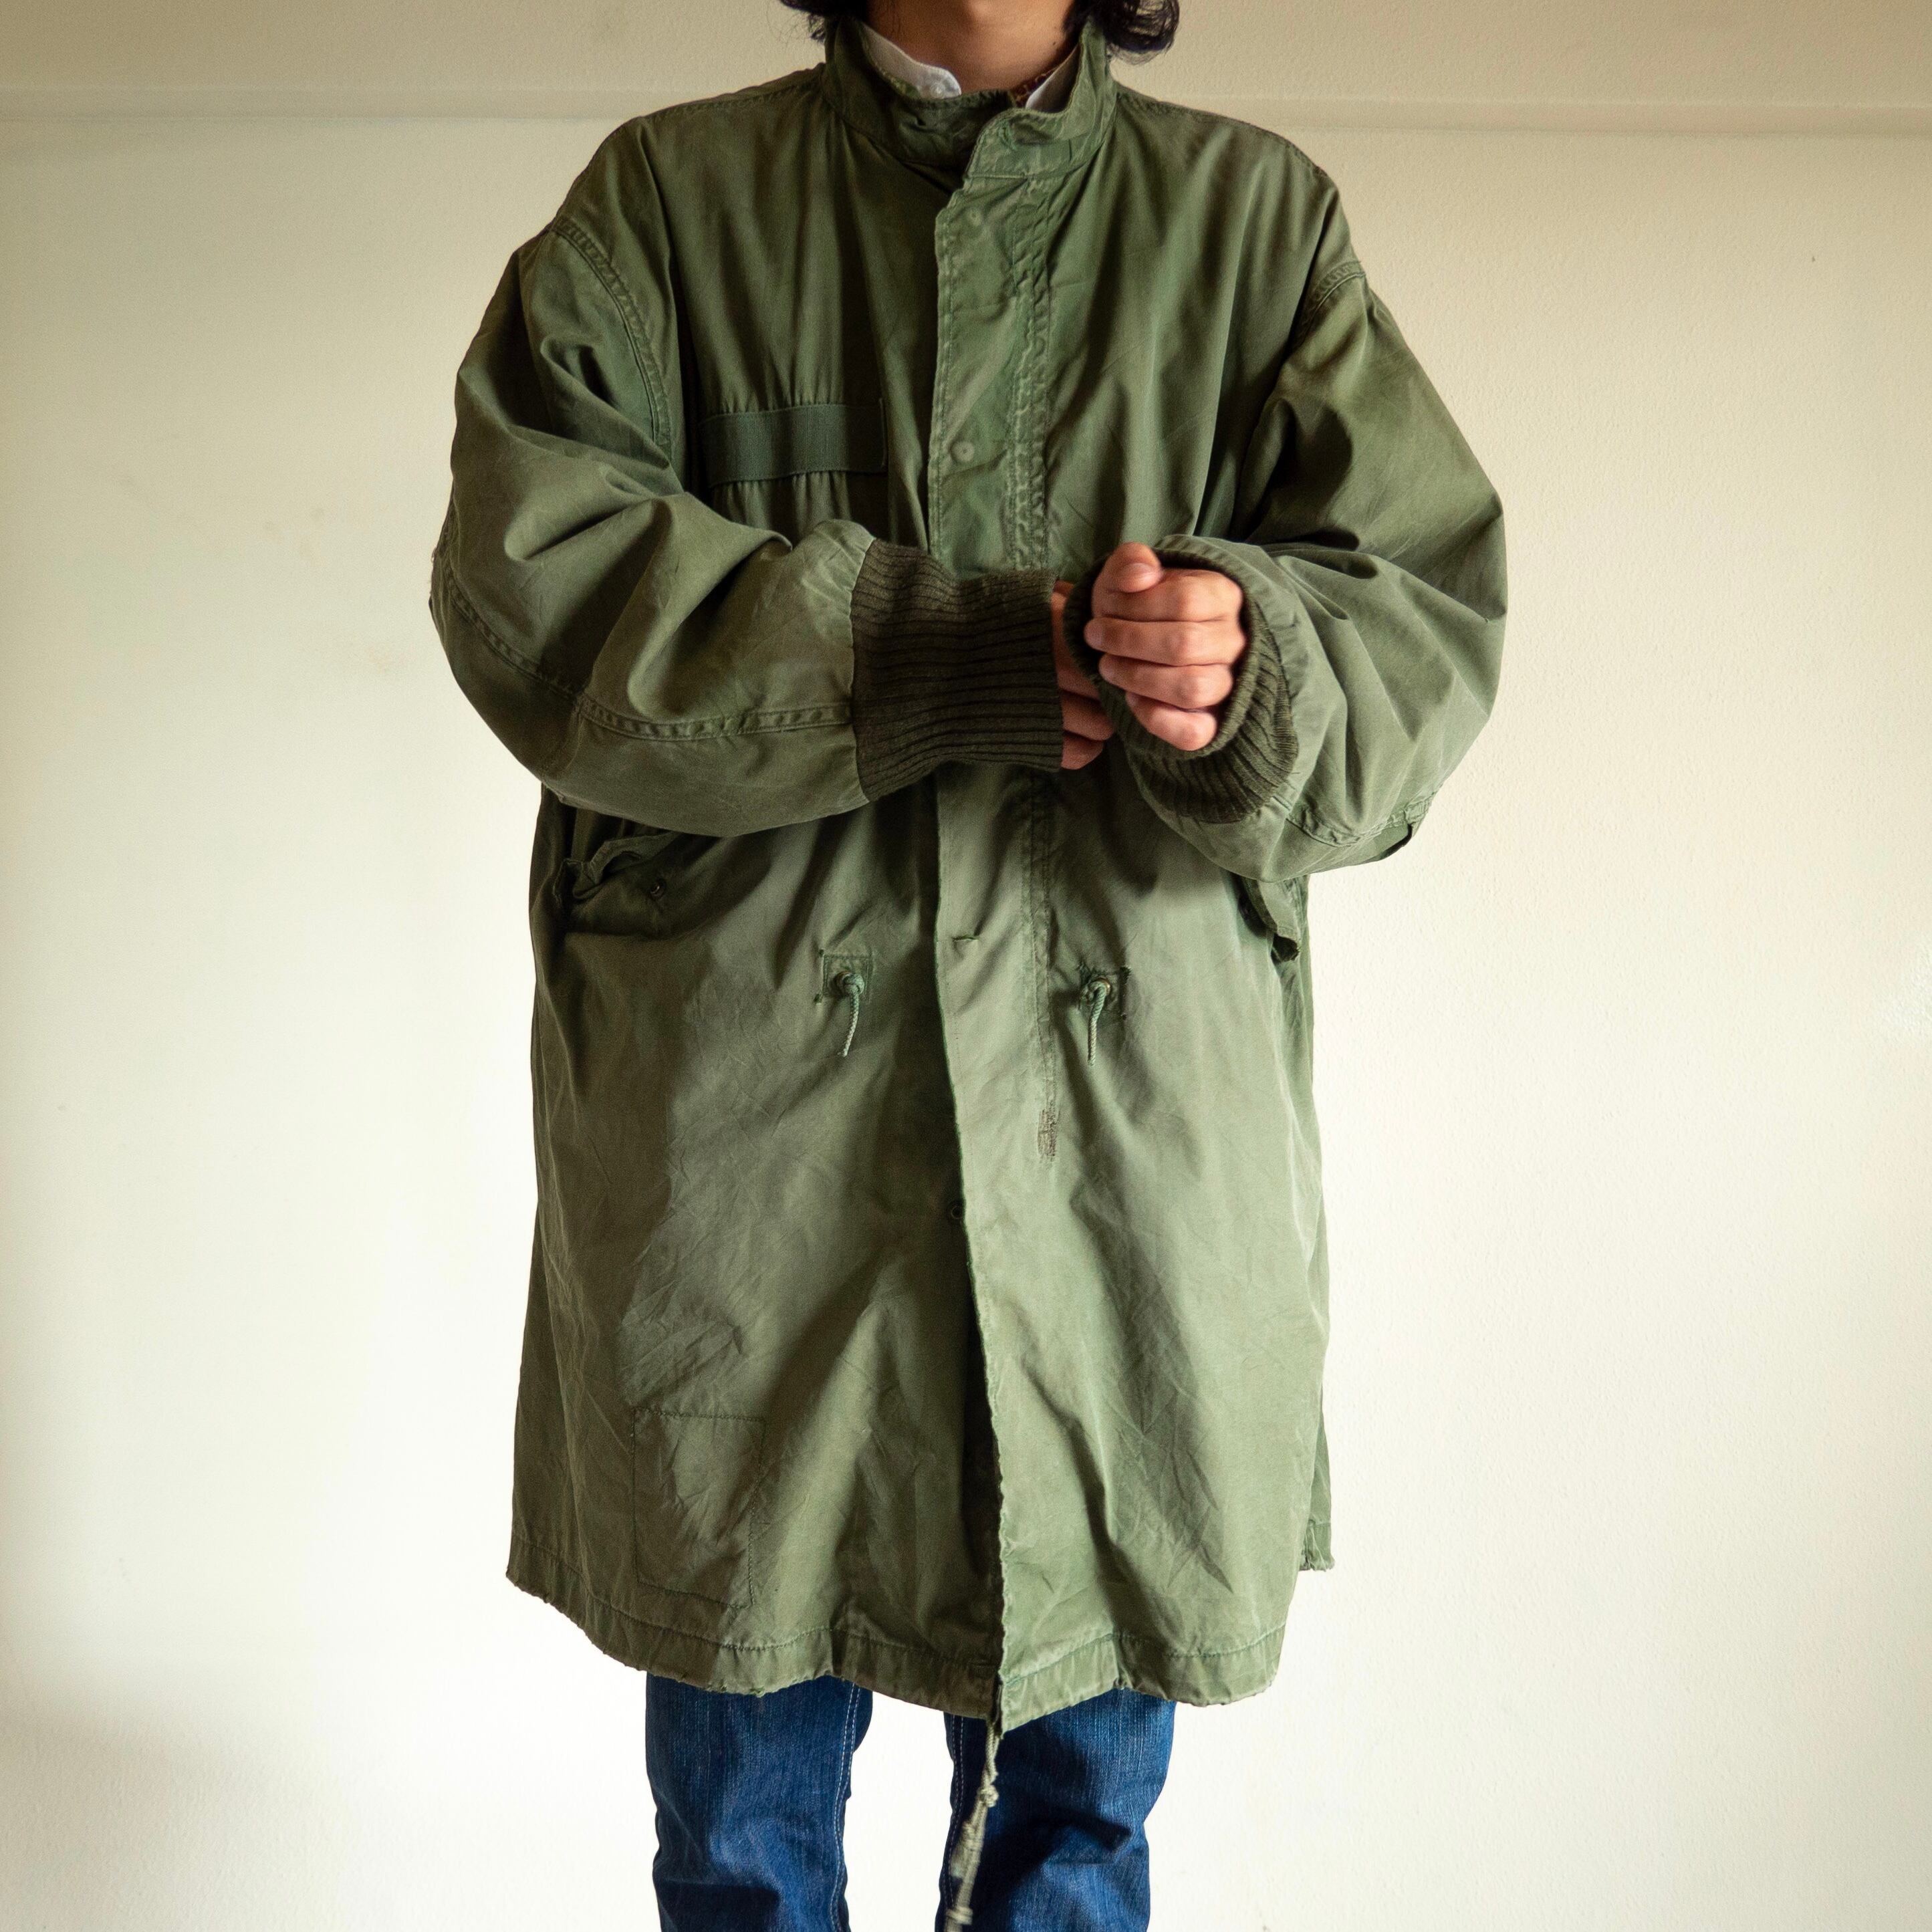 Customized M-65 Fishtail parka with Liner